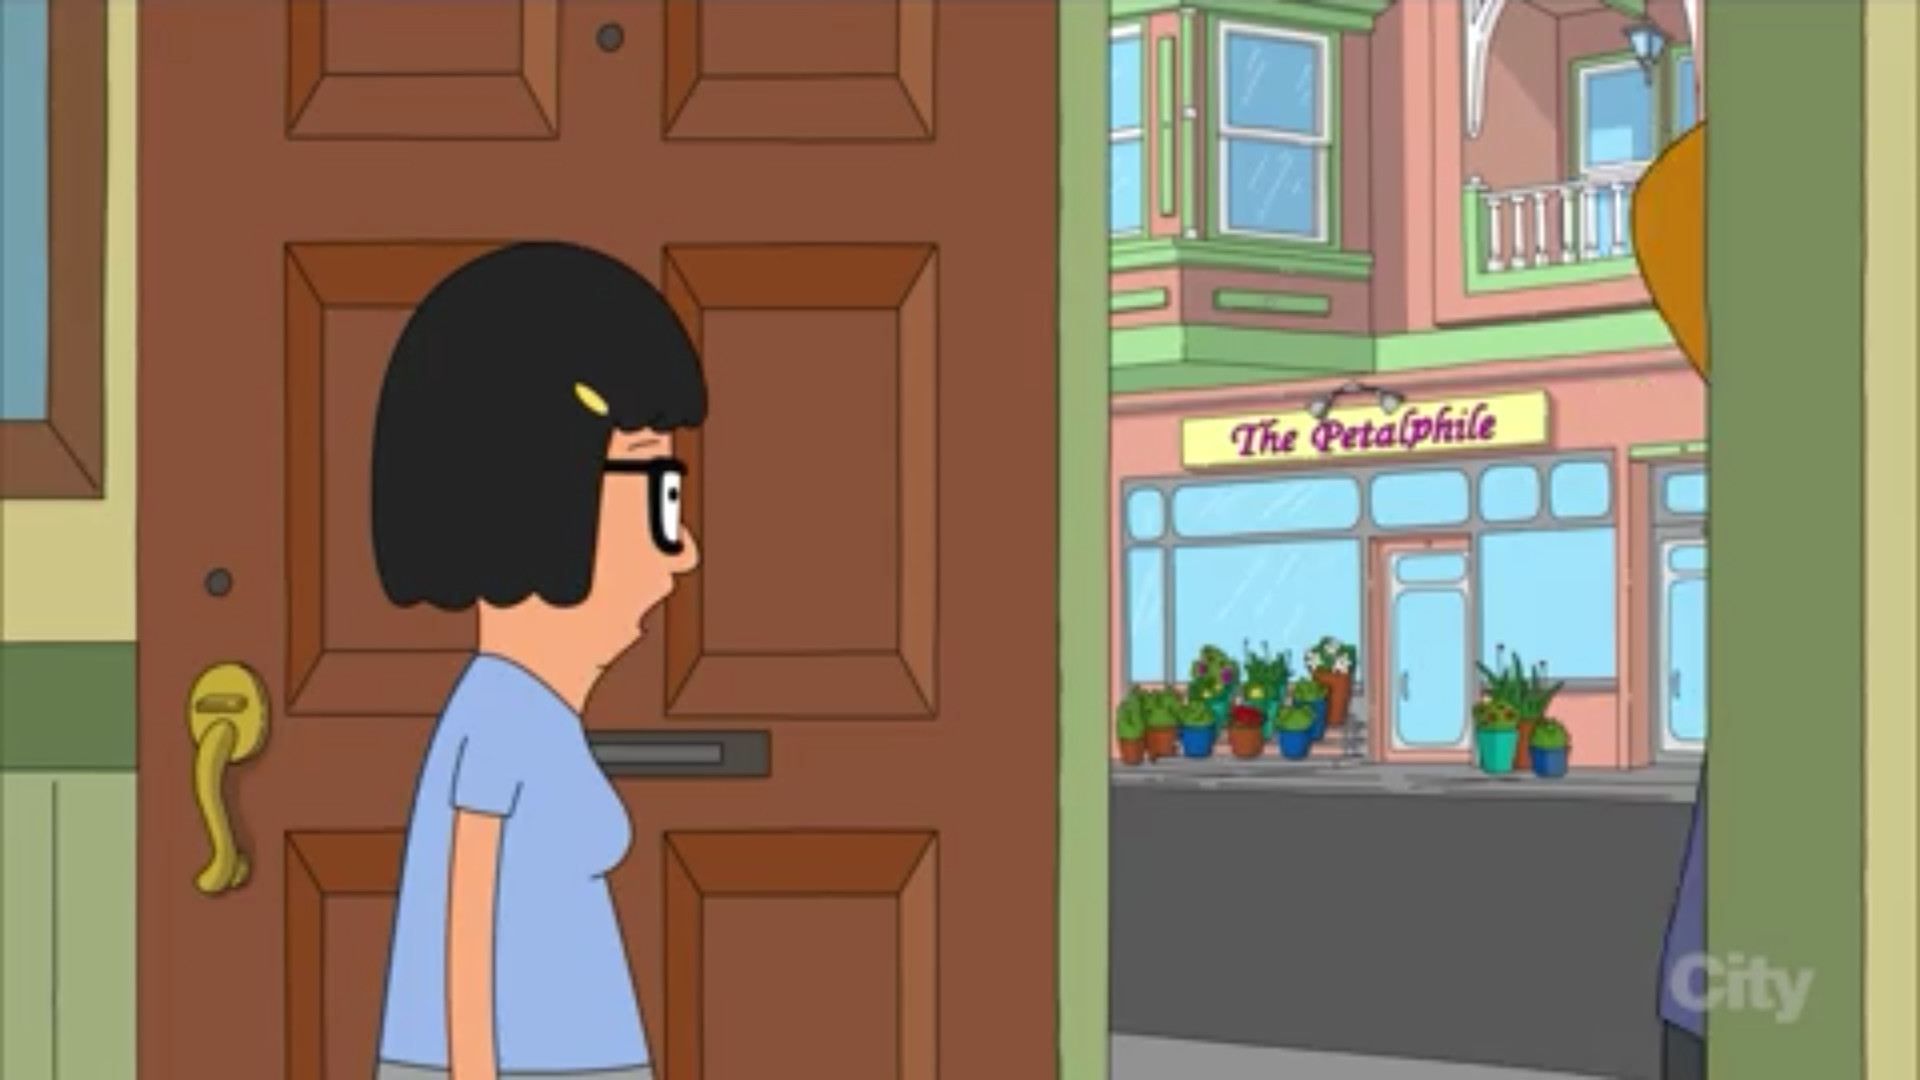 Something I Found While Watching The New Episode Of - Bobs Burgers Pedaphile Shop - HD Wallpaper 